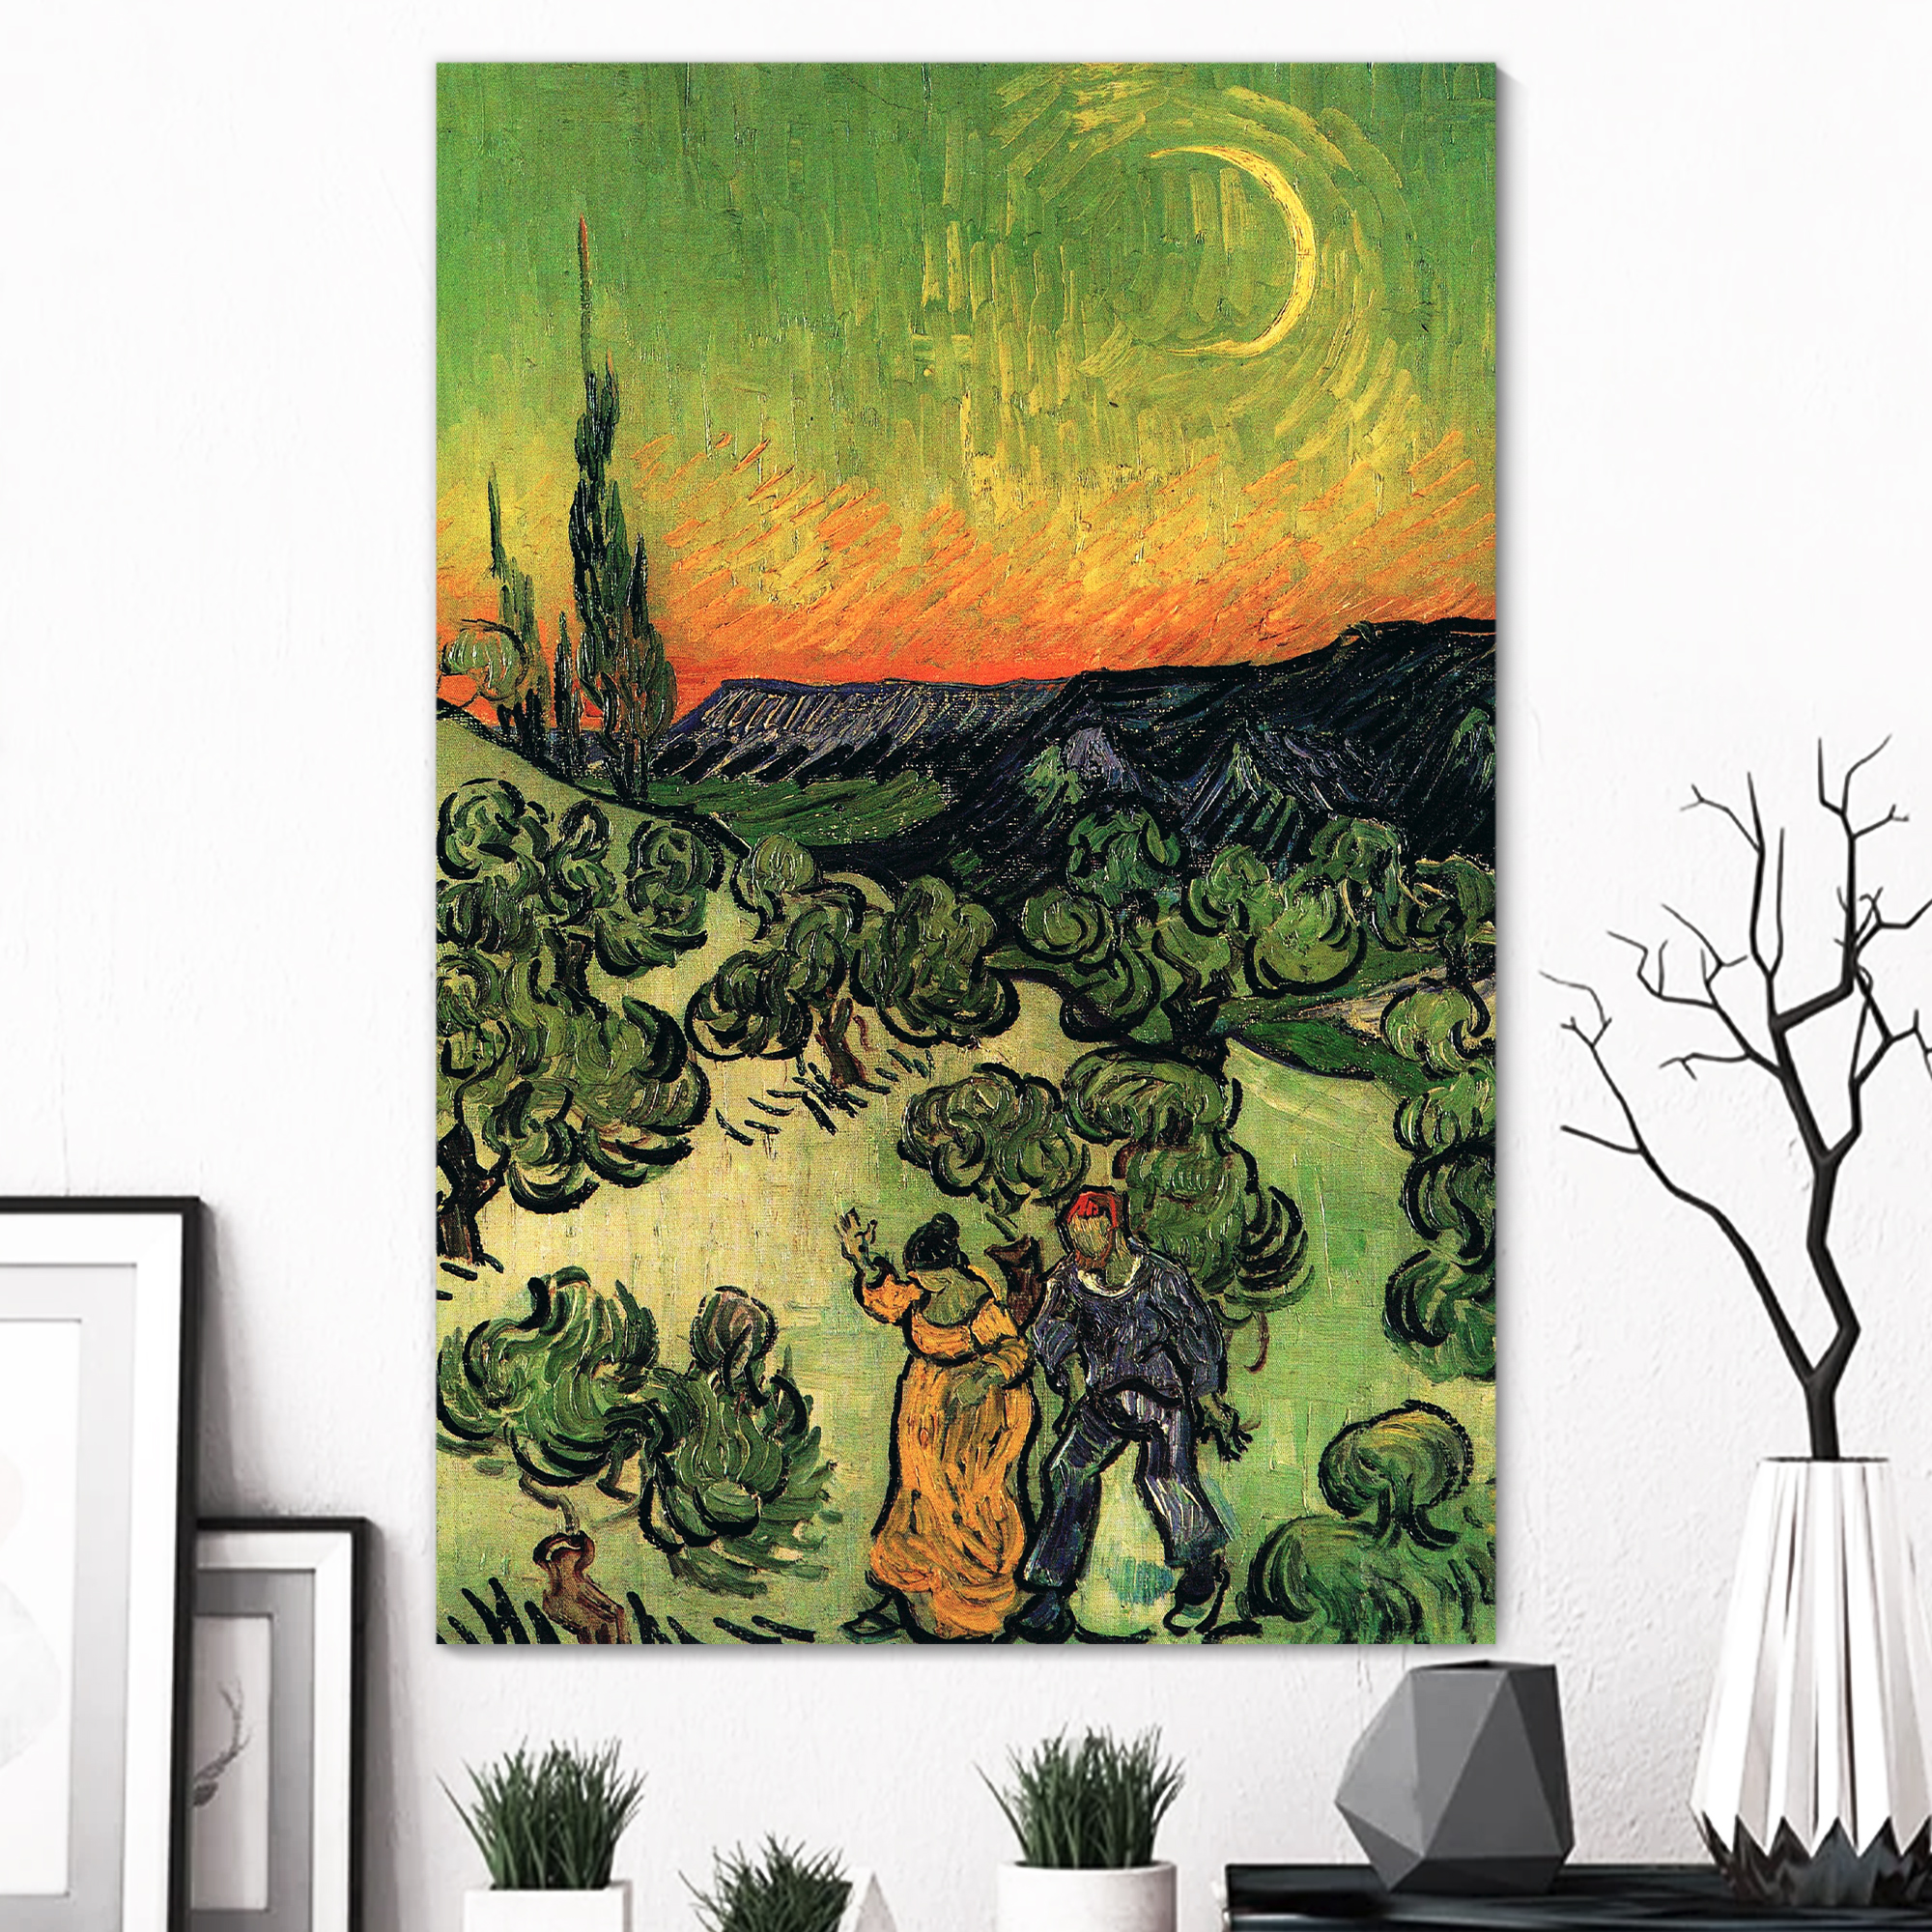 Landscape with Couple Walking and Crescent Moon by Vincent Van Gogh - Canvas Print Wall Art Famous Painting Reproduction - 16